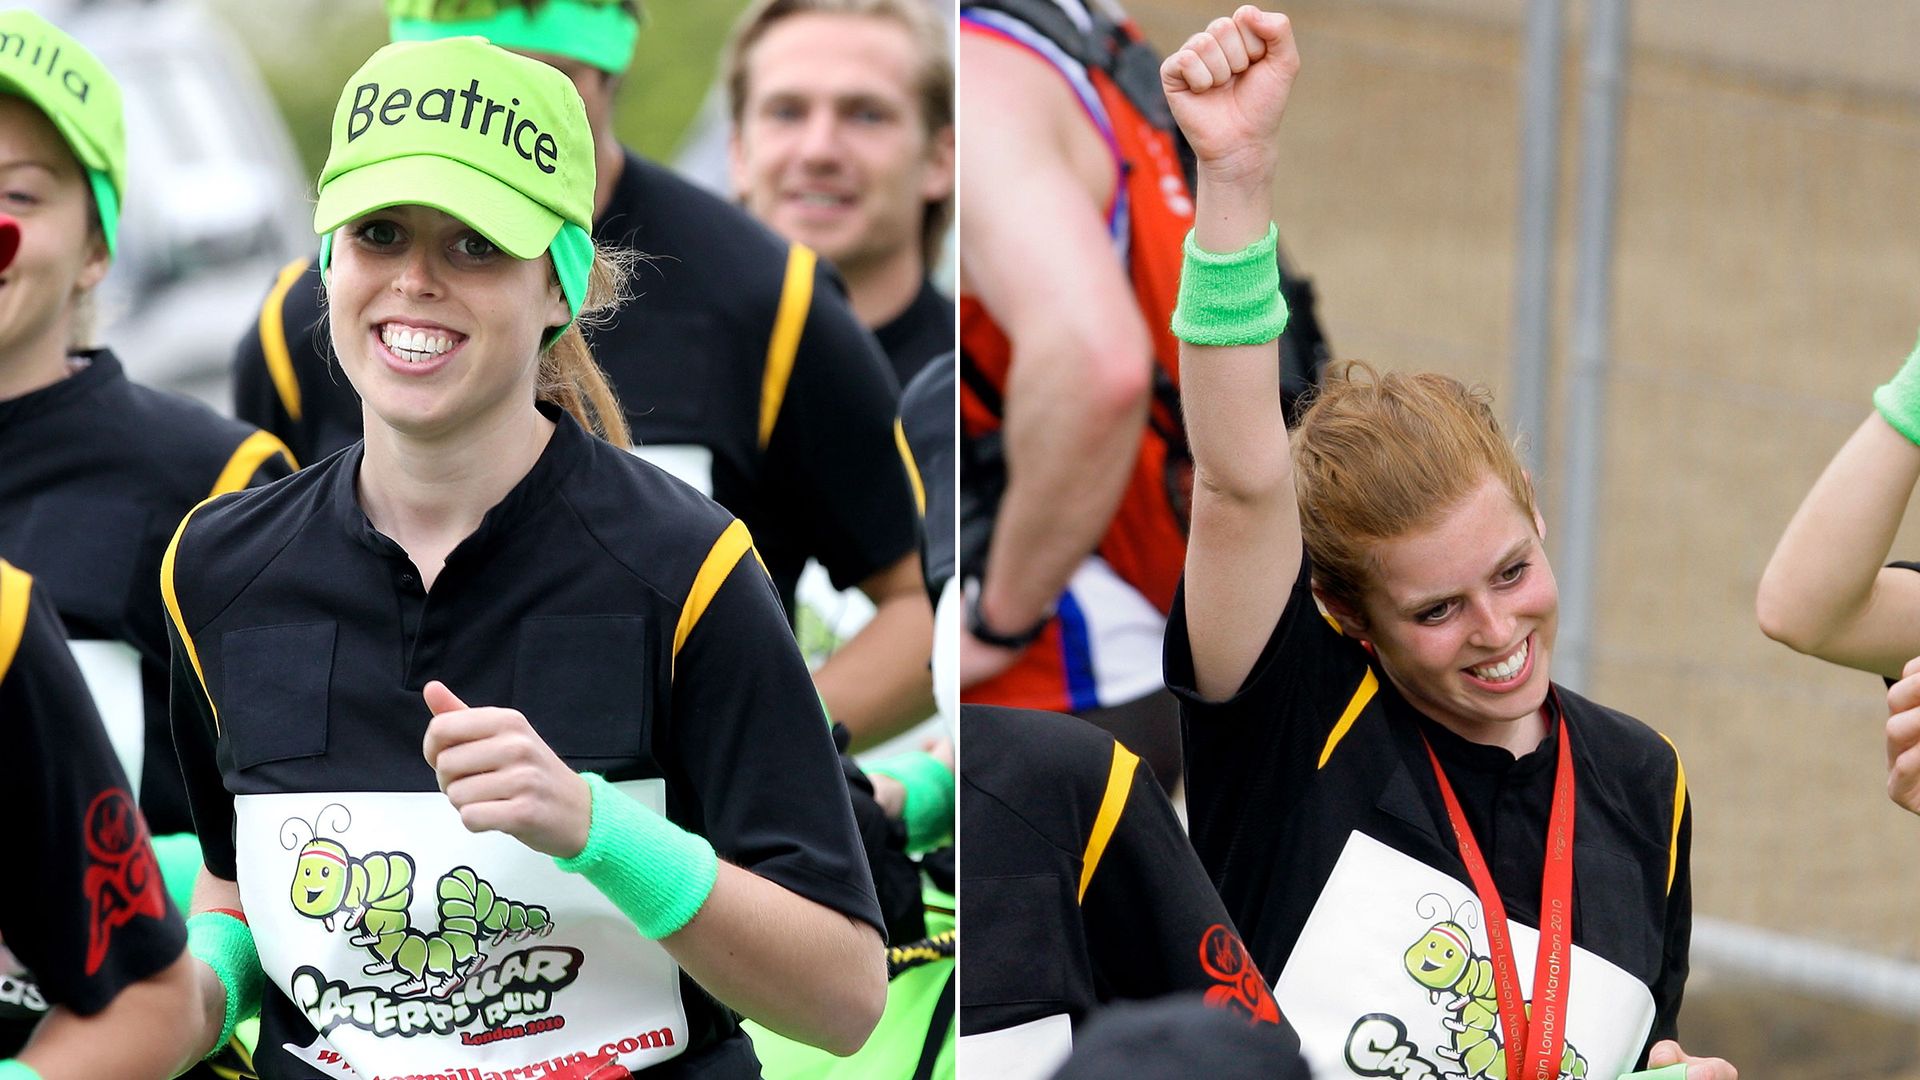 Why Princess Beatrice is the only royal to have run the London Marathon